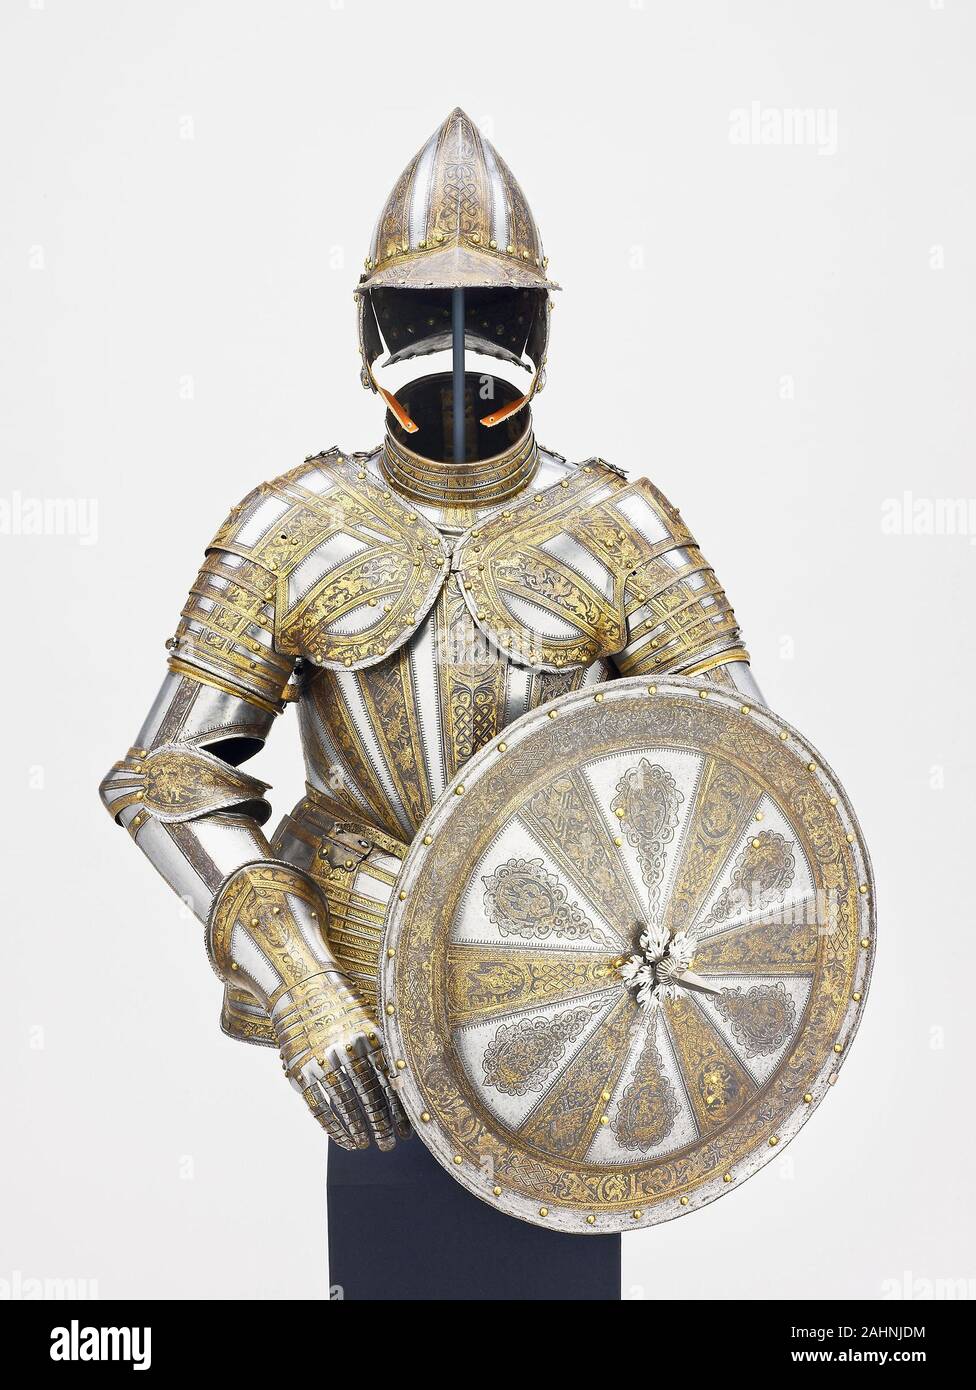 Half Armor and Targe for Service on Foot. 1585–1605. Milan. Steel, gilding, brass, and leather This is an unusually fine armor with matching targe (shield) for an infantry officer. On the breastplate and pauldrons of this ceremonial parade armor, the etched bands are embellished with interlace, trophies, fabulous beasts, and etched medallions that enclose classical figures reminiscent of Roman heroes. The etched radiating bands retain their original gilded surface, which contrasts effectively with adjacent areas left blackened in the forging process. Armor could be worn with costume accessorie Stock Photo